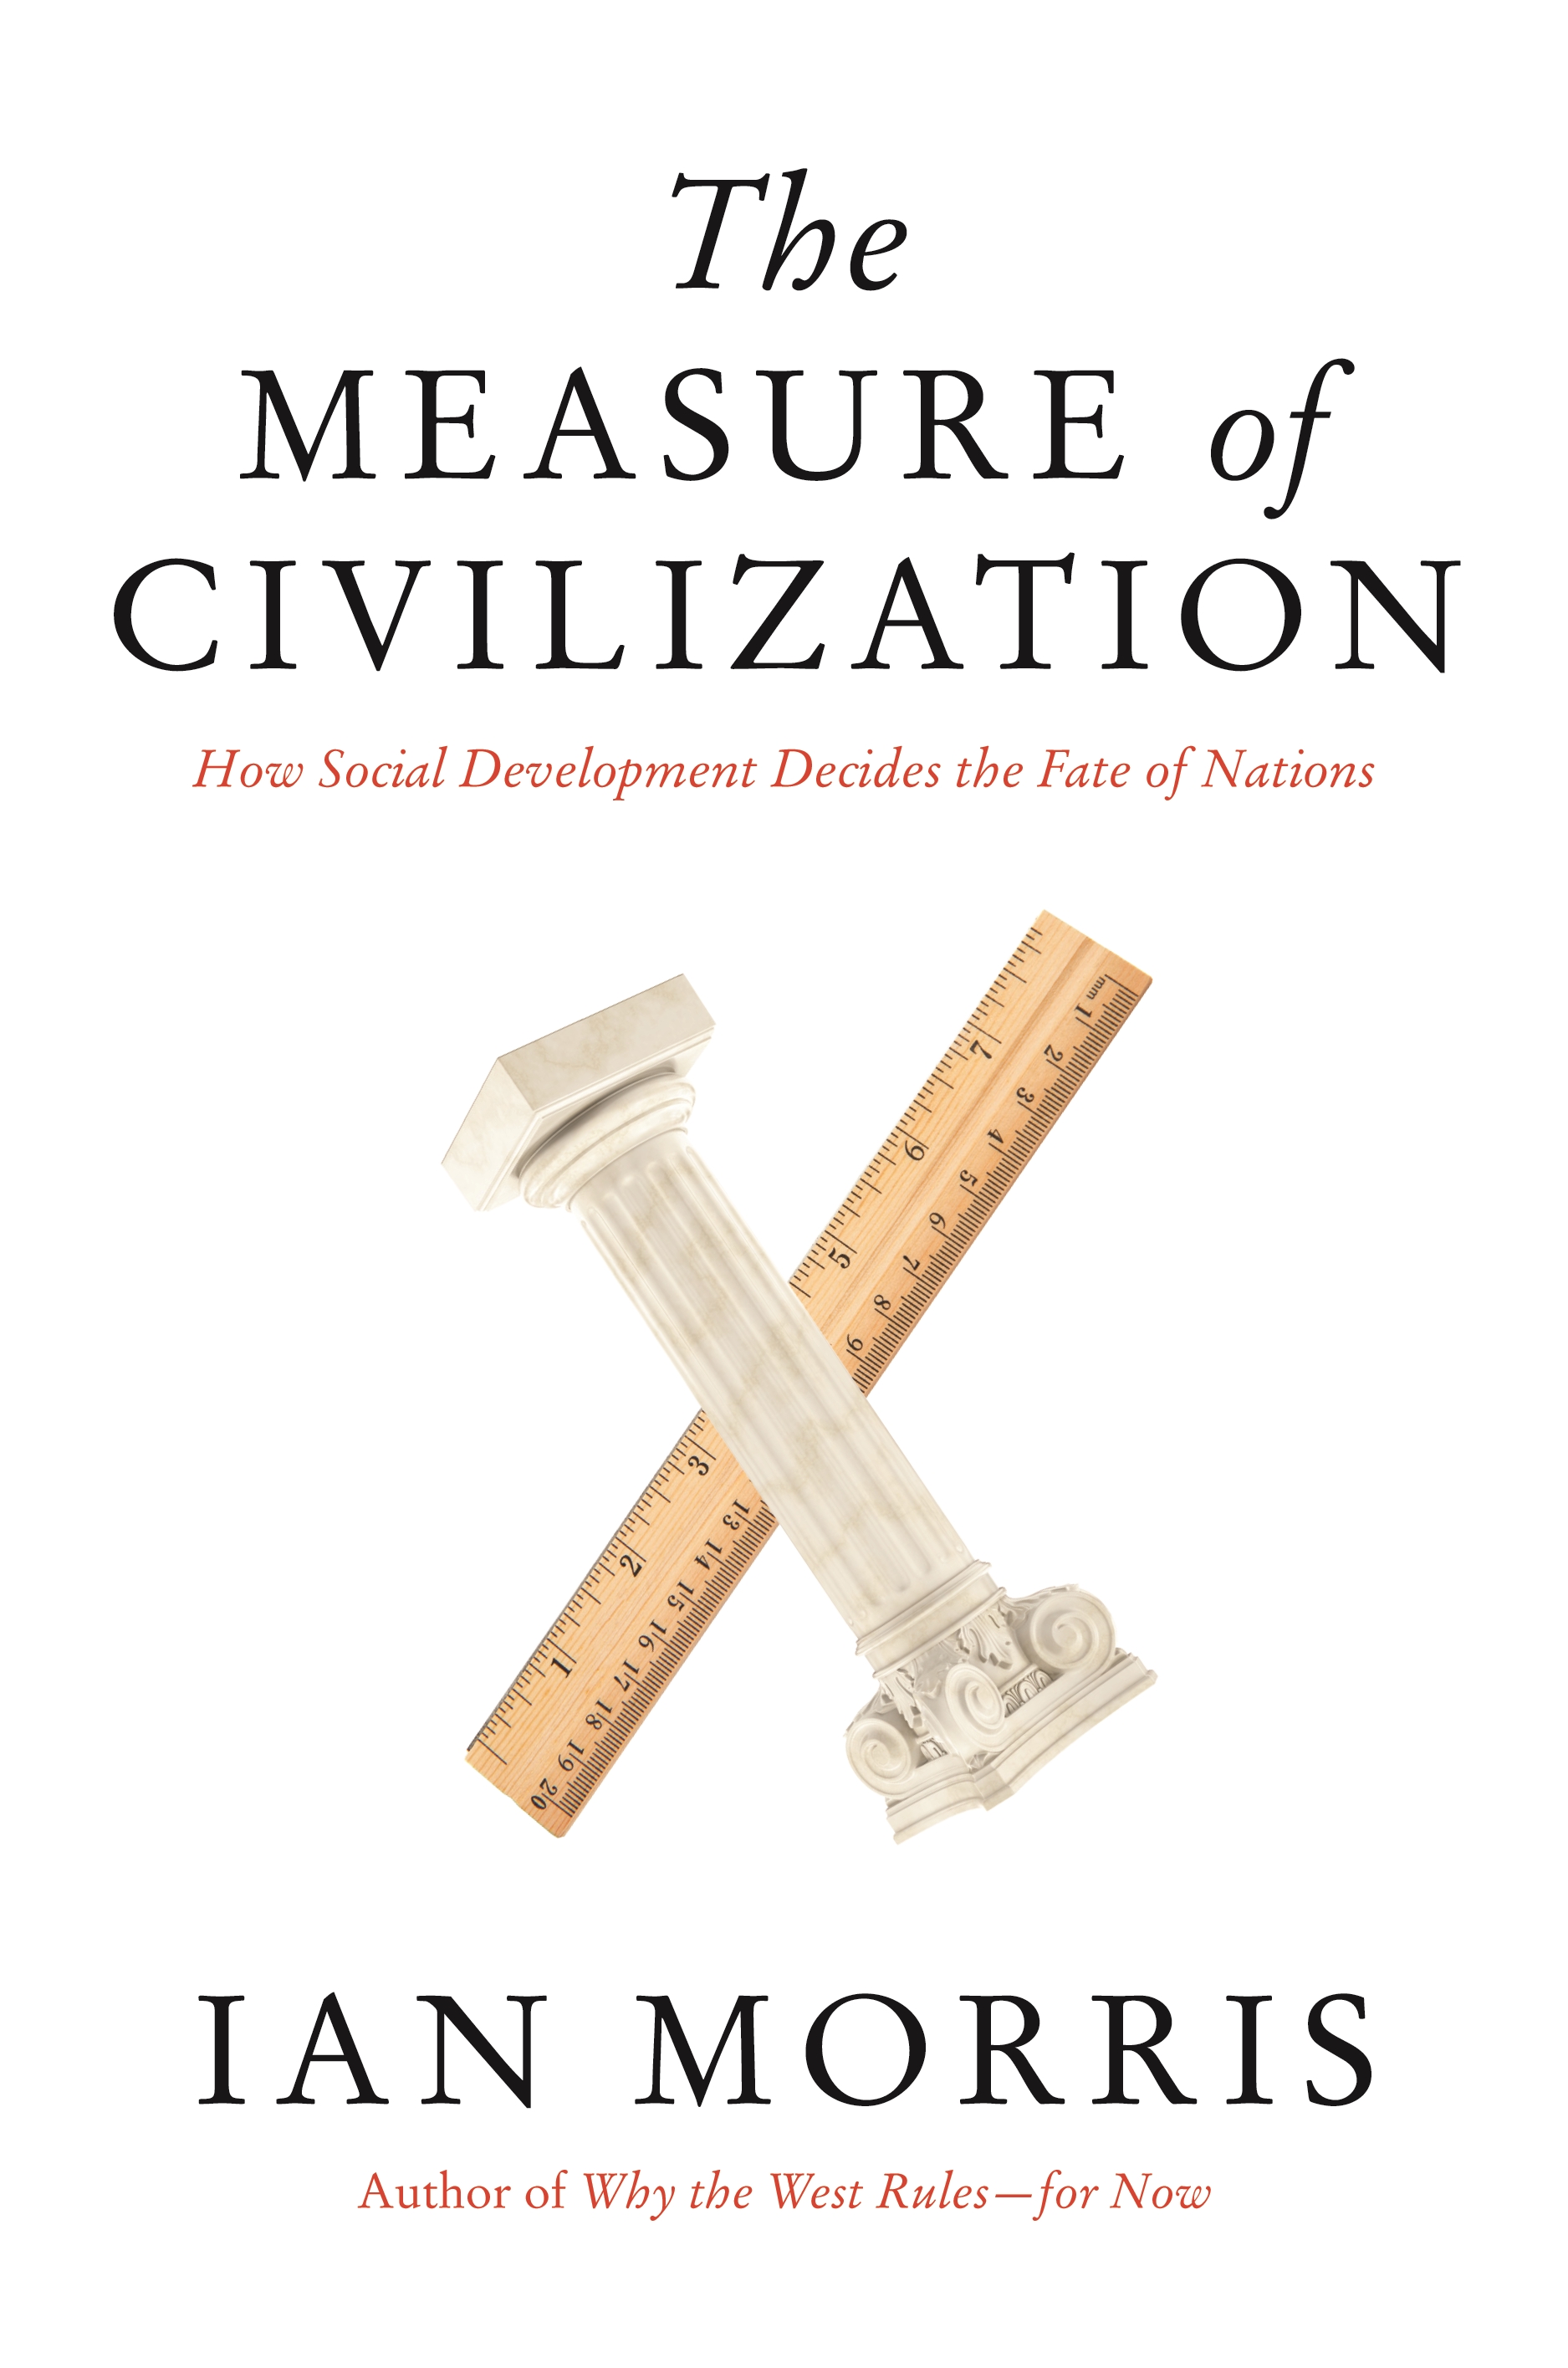 The Measure of Civilization: How Social Development Decides the Fate of Nations Ian Morris Author